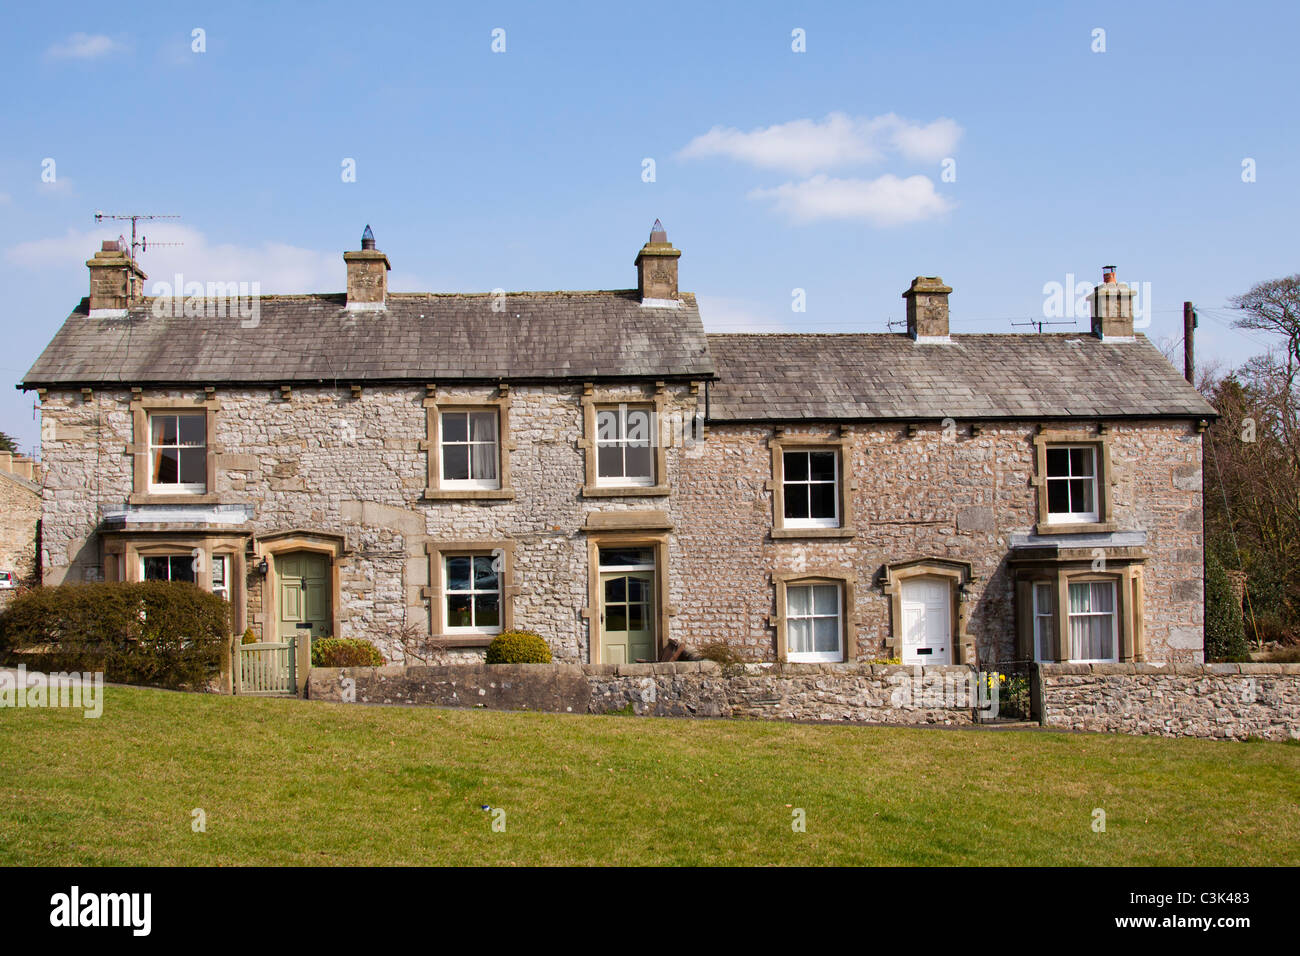 House in the village of Austwick, part of the Yorkshire Dales national park, England, UK Stock Photo